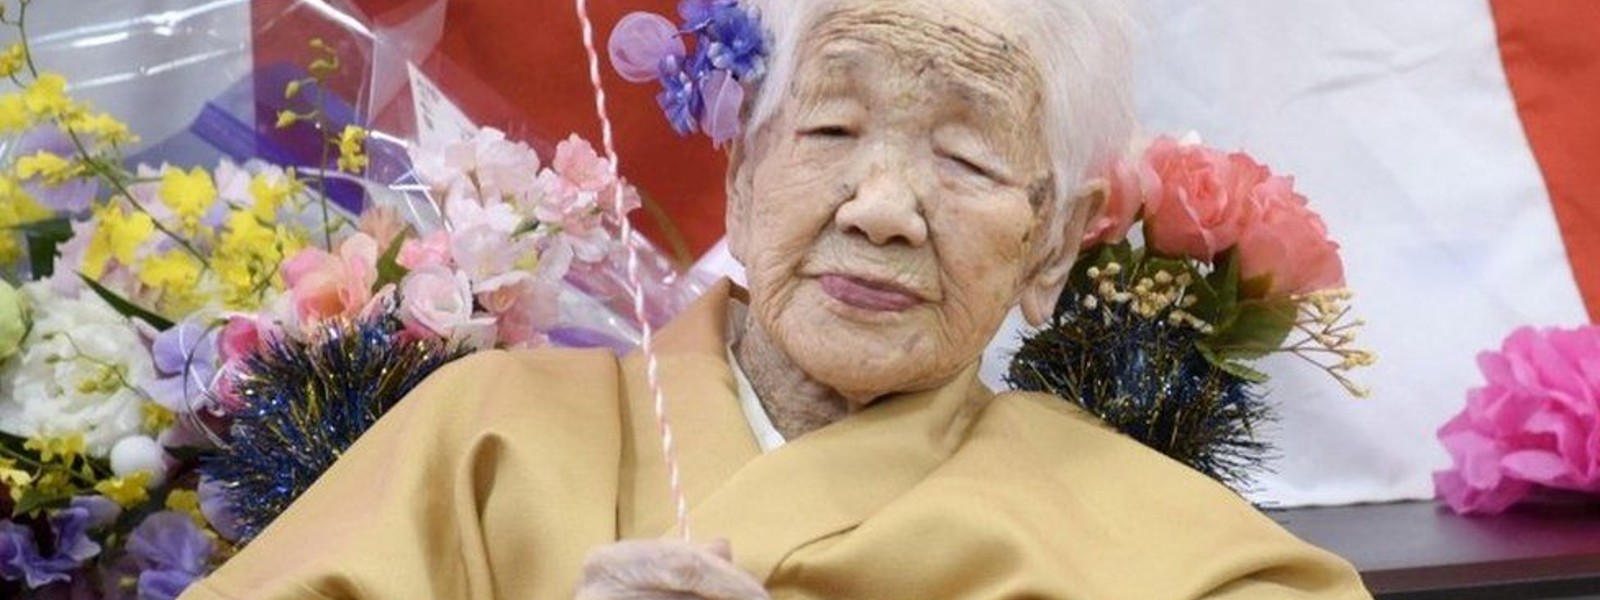 Japanese woman certified worlds oldest person dies